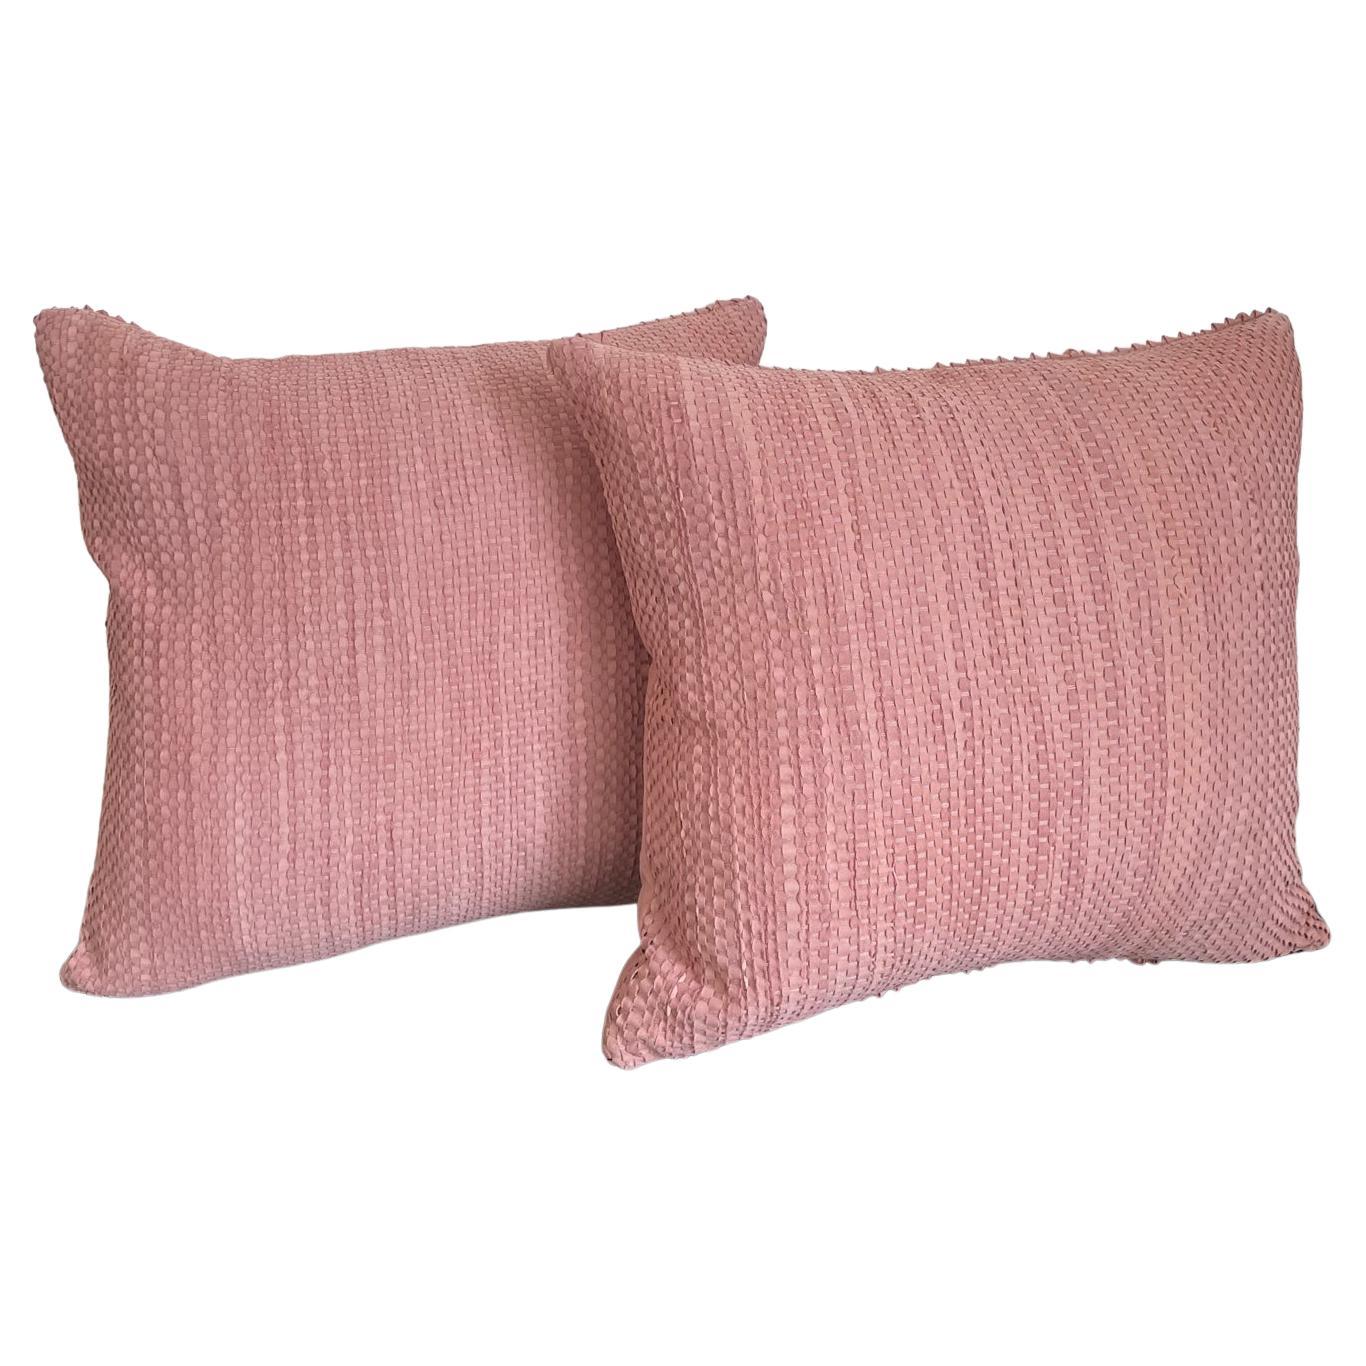 Pair Hand Woven Suede Cushions Color Pale Pink For Sale